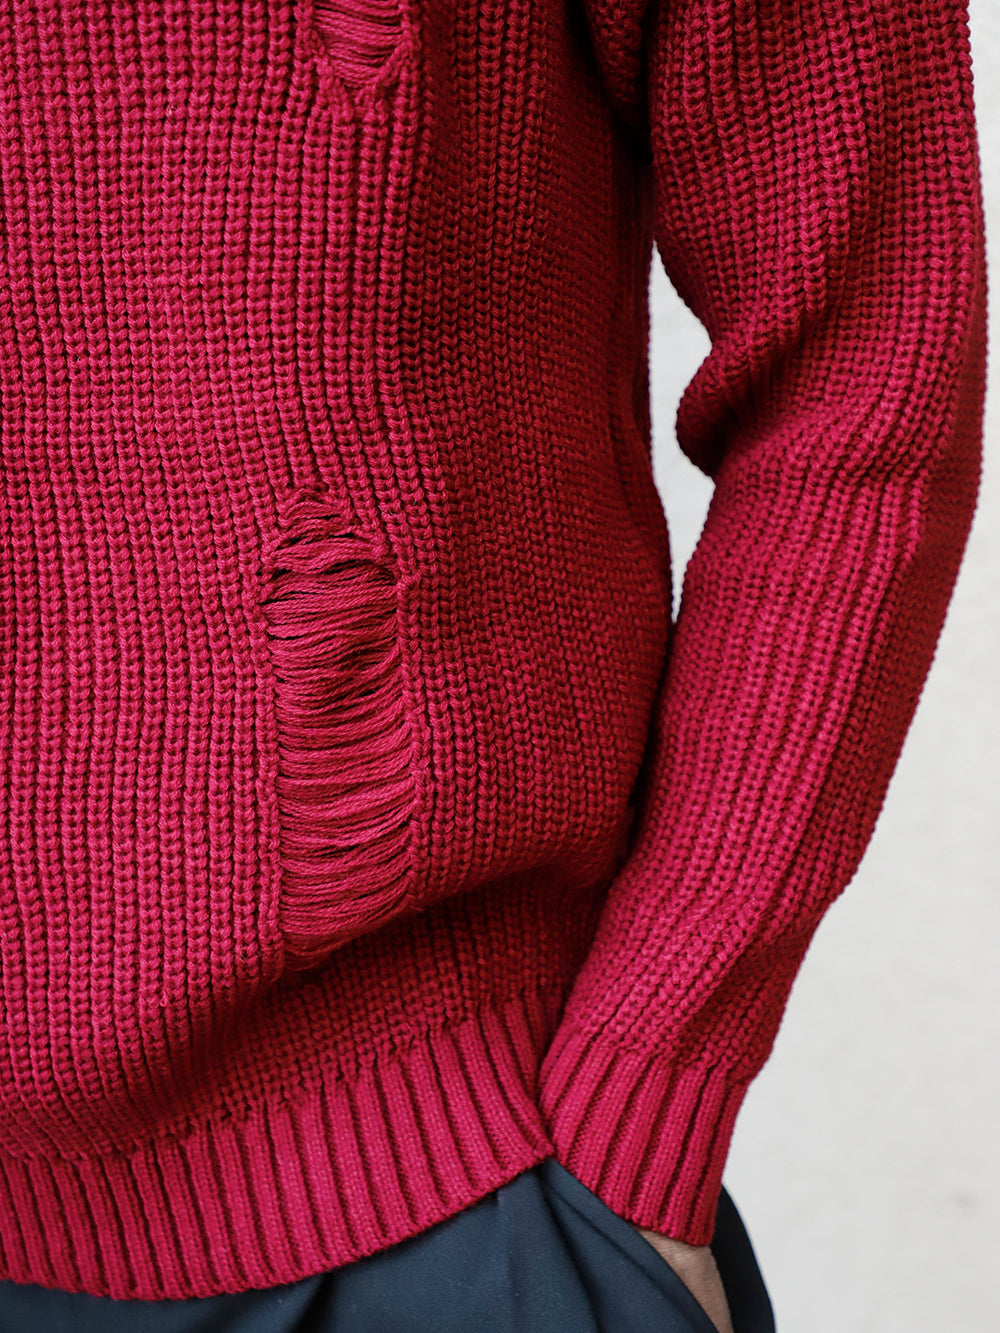 A man wearing a red DISTRESSED GENTLEMAN SWEATER | BURGUNDY made of Acrylic.